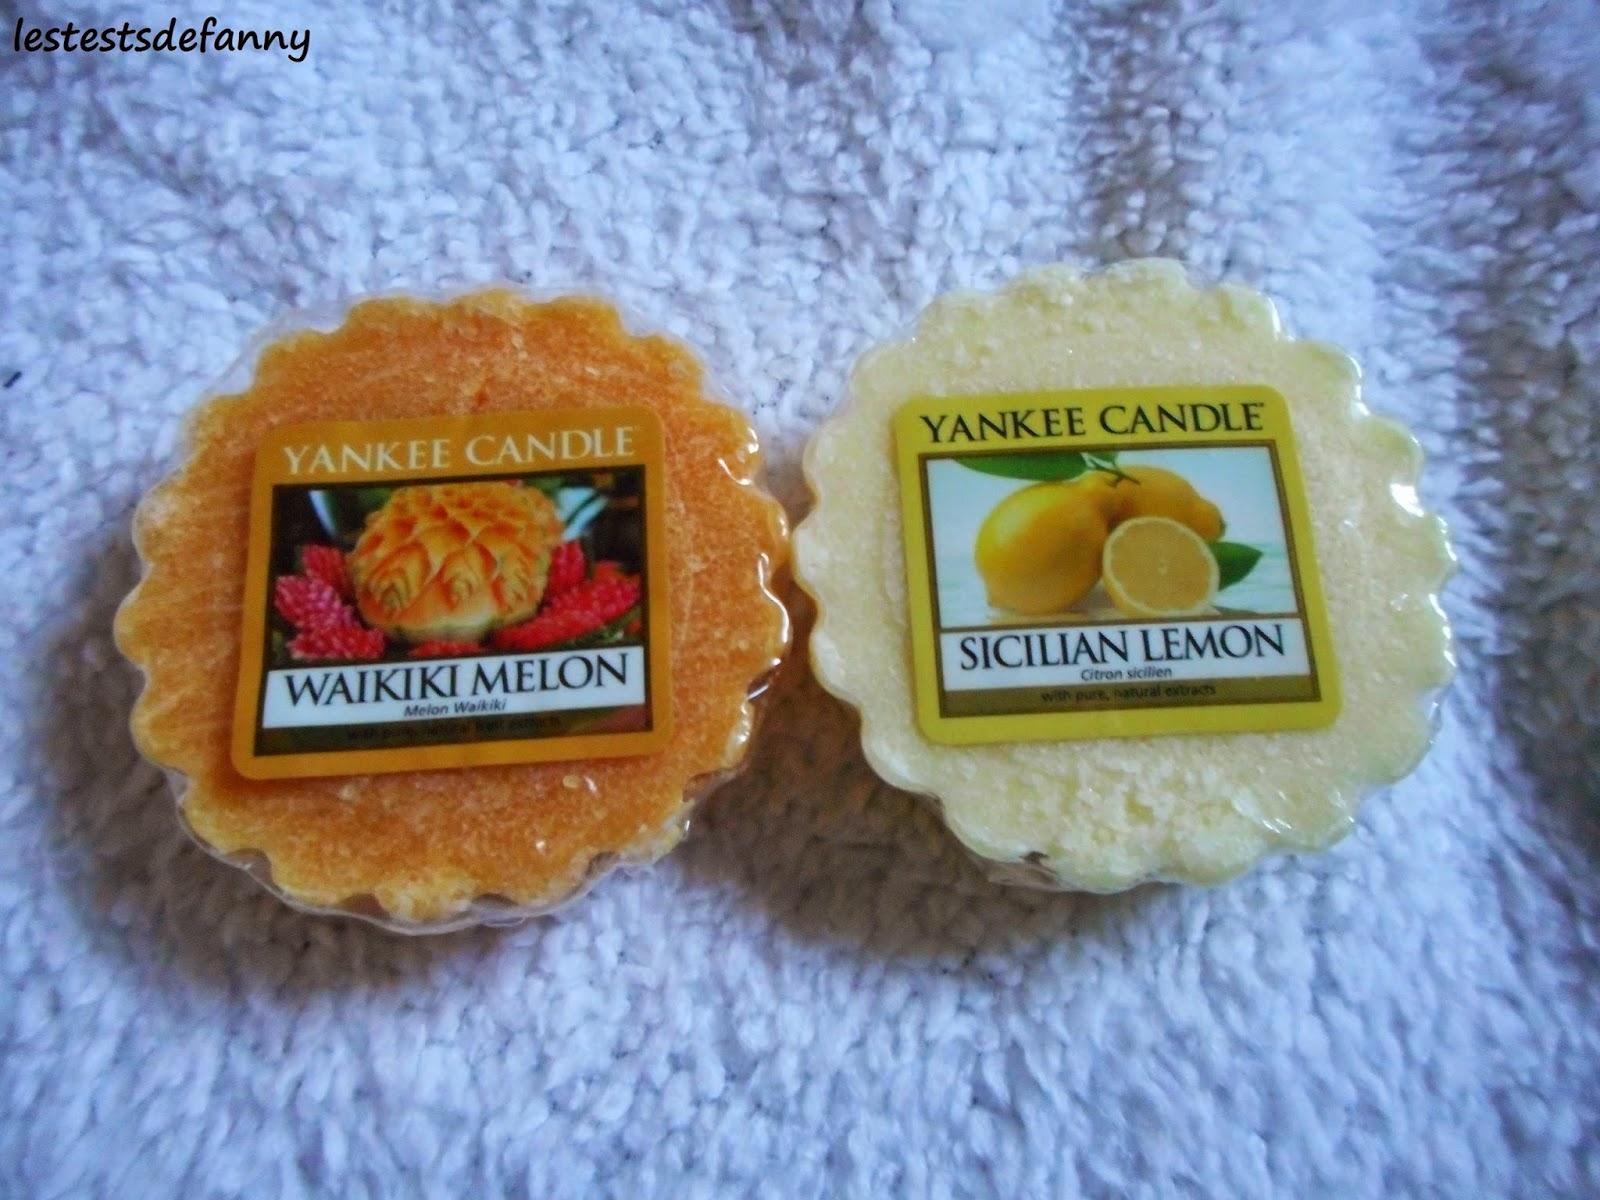 Second haul Yankee Candles